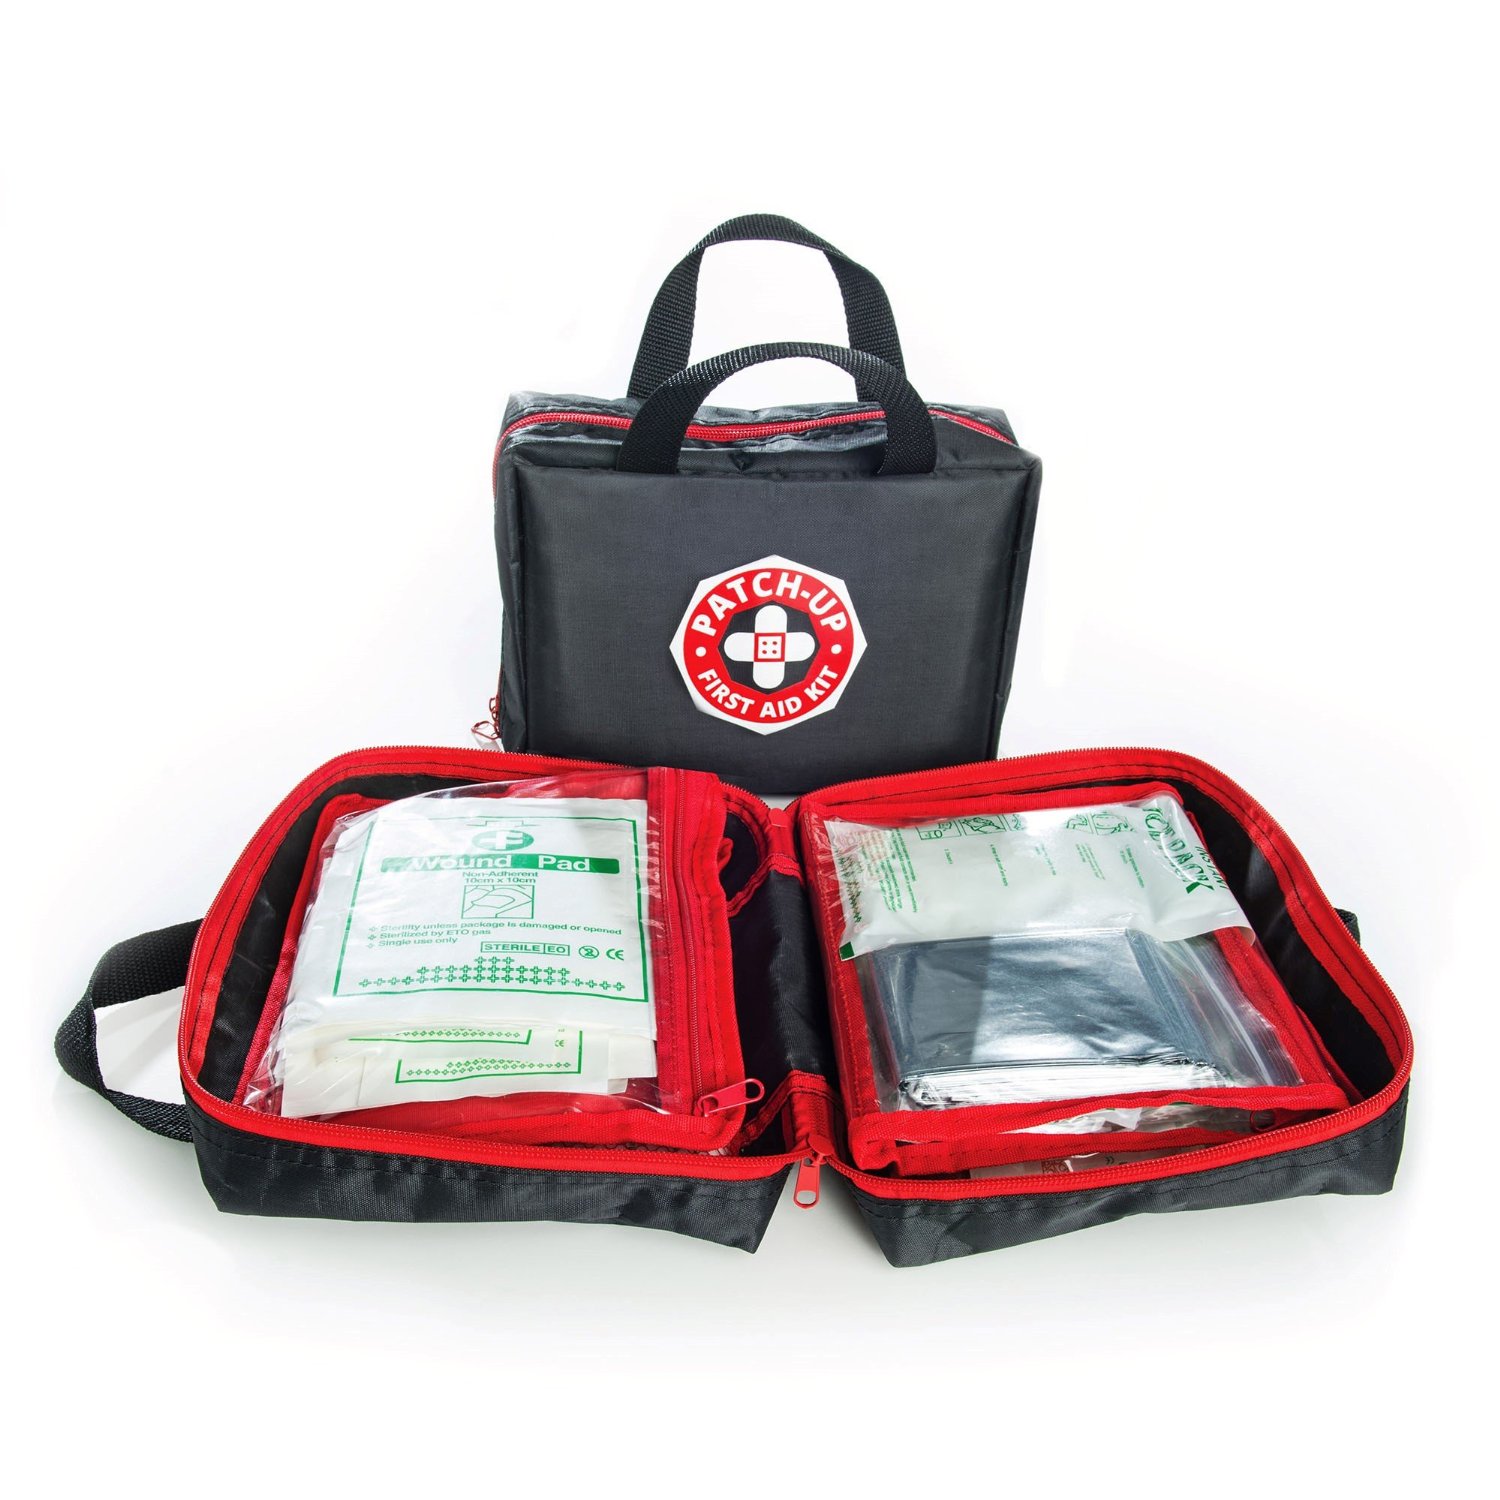 Patch-Up First Aid Kit Review